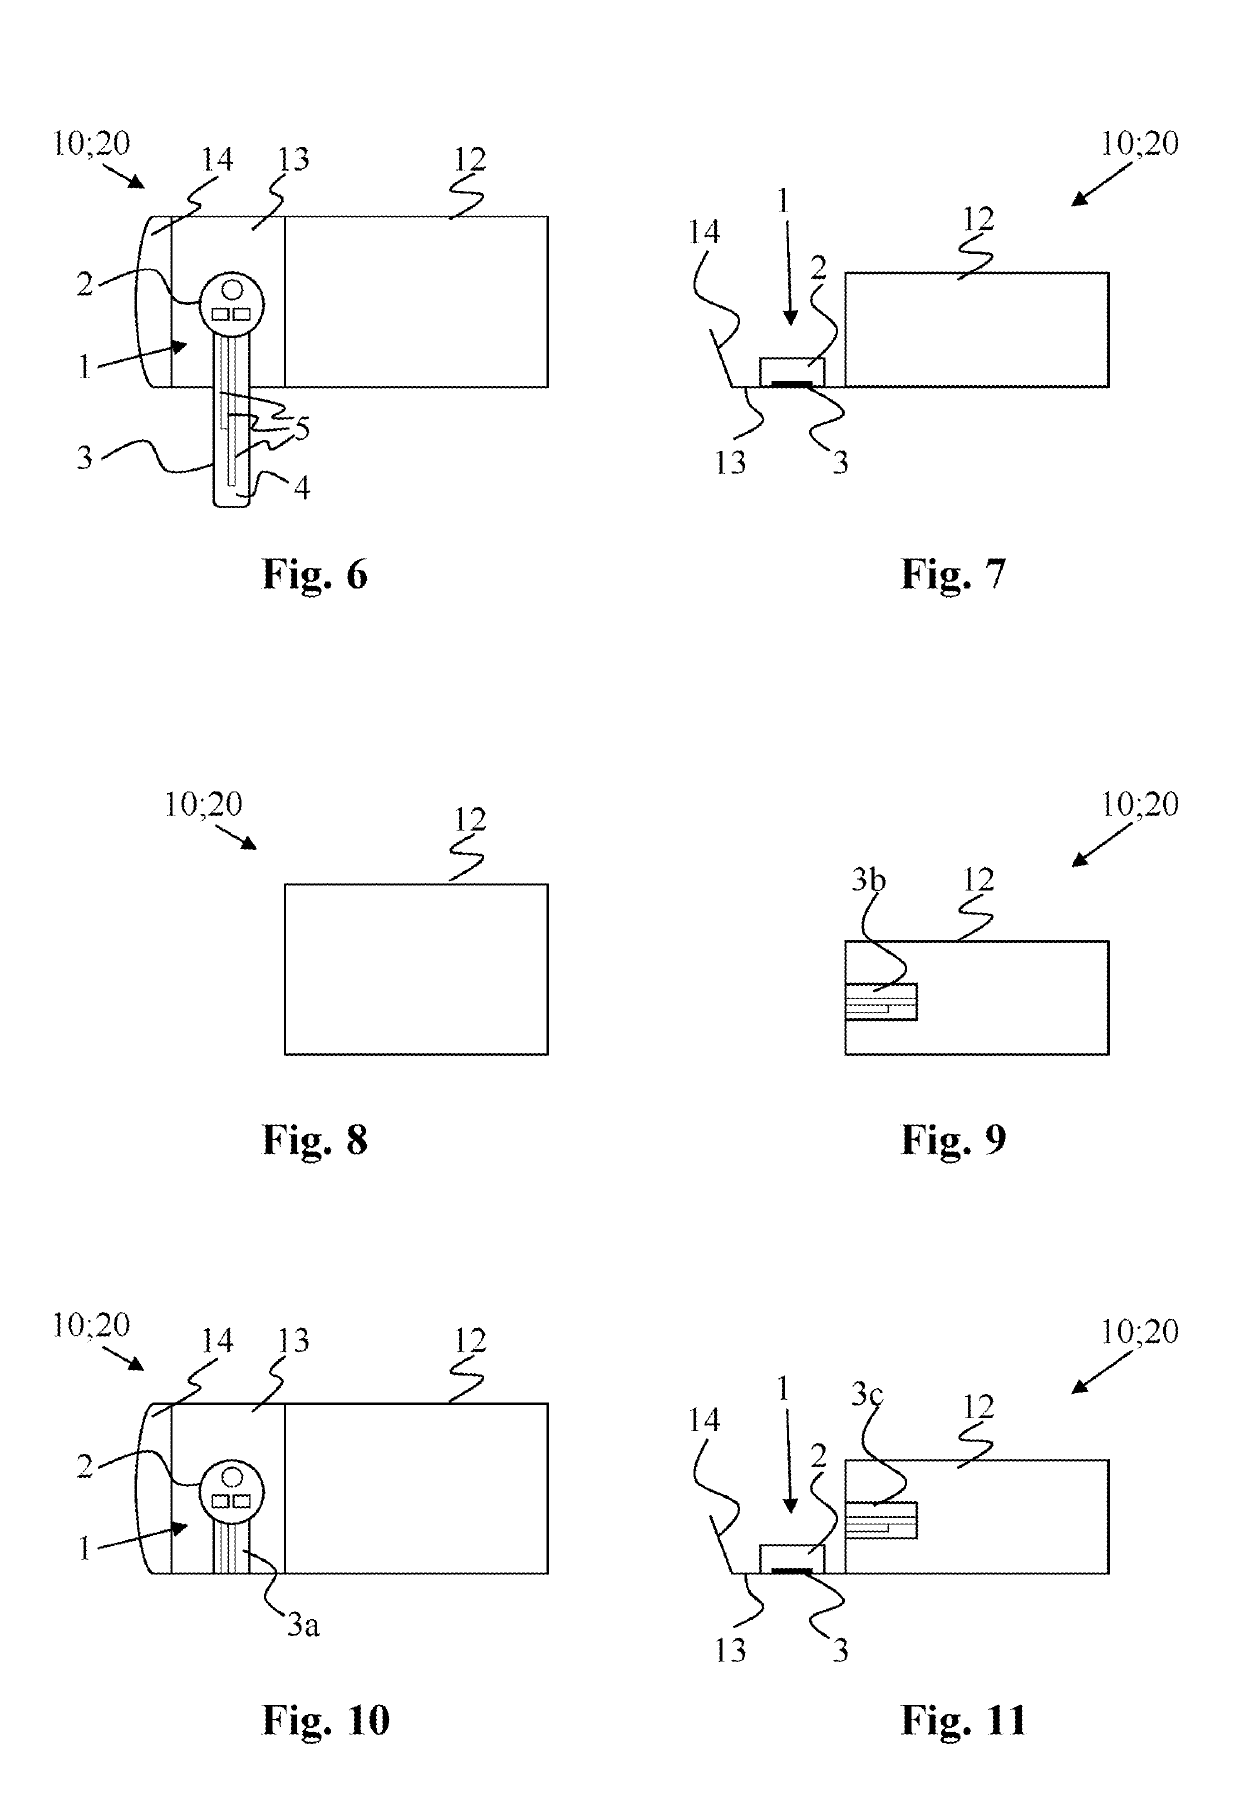 Package for pharmaceutical product, comprising miniaturized electronic tag for monitoring product integrity